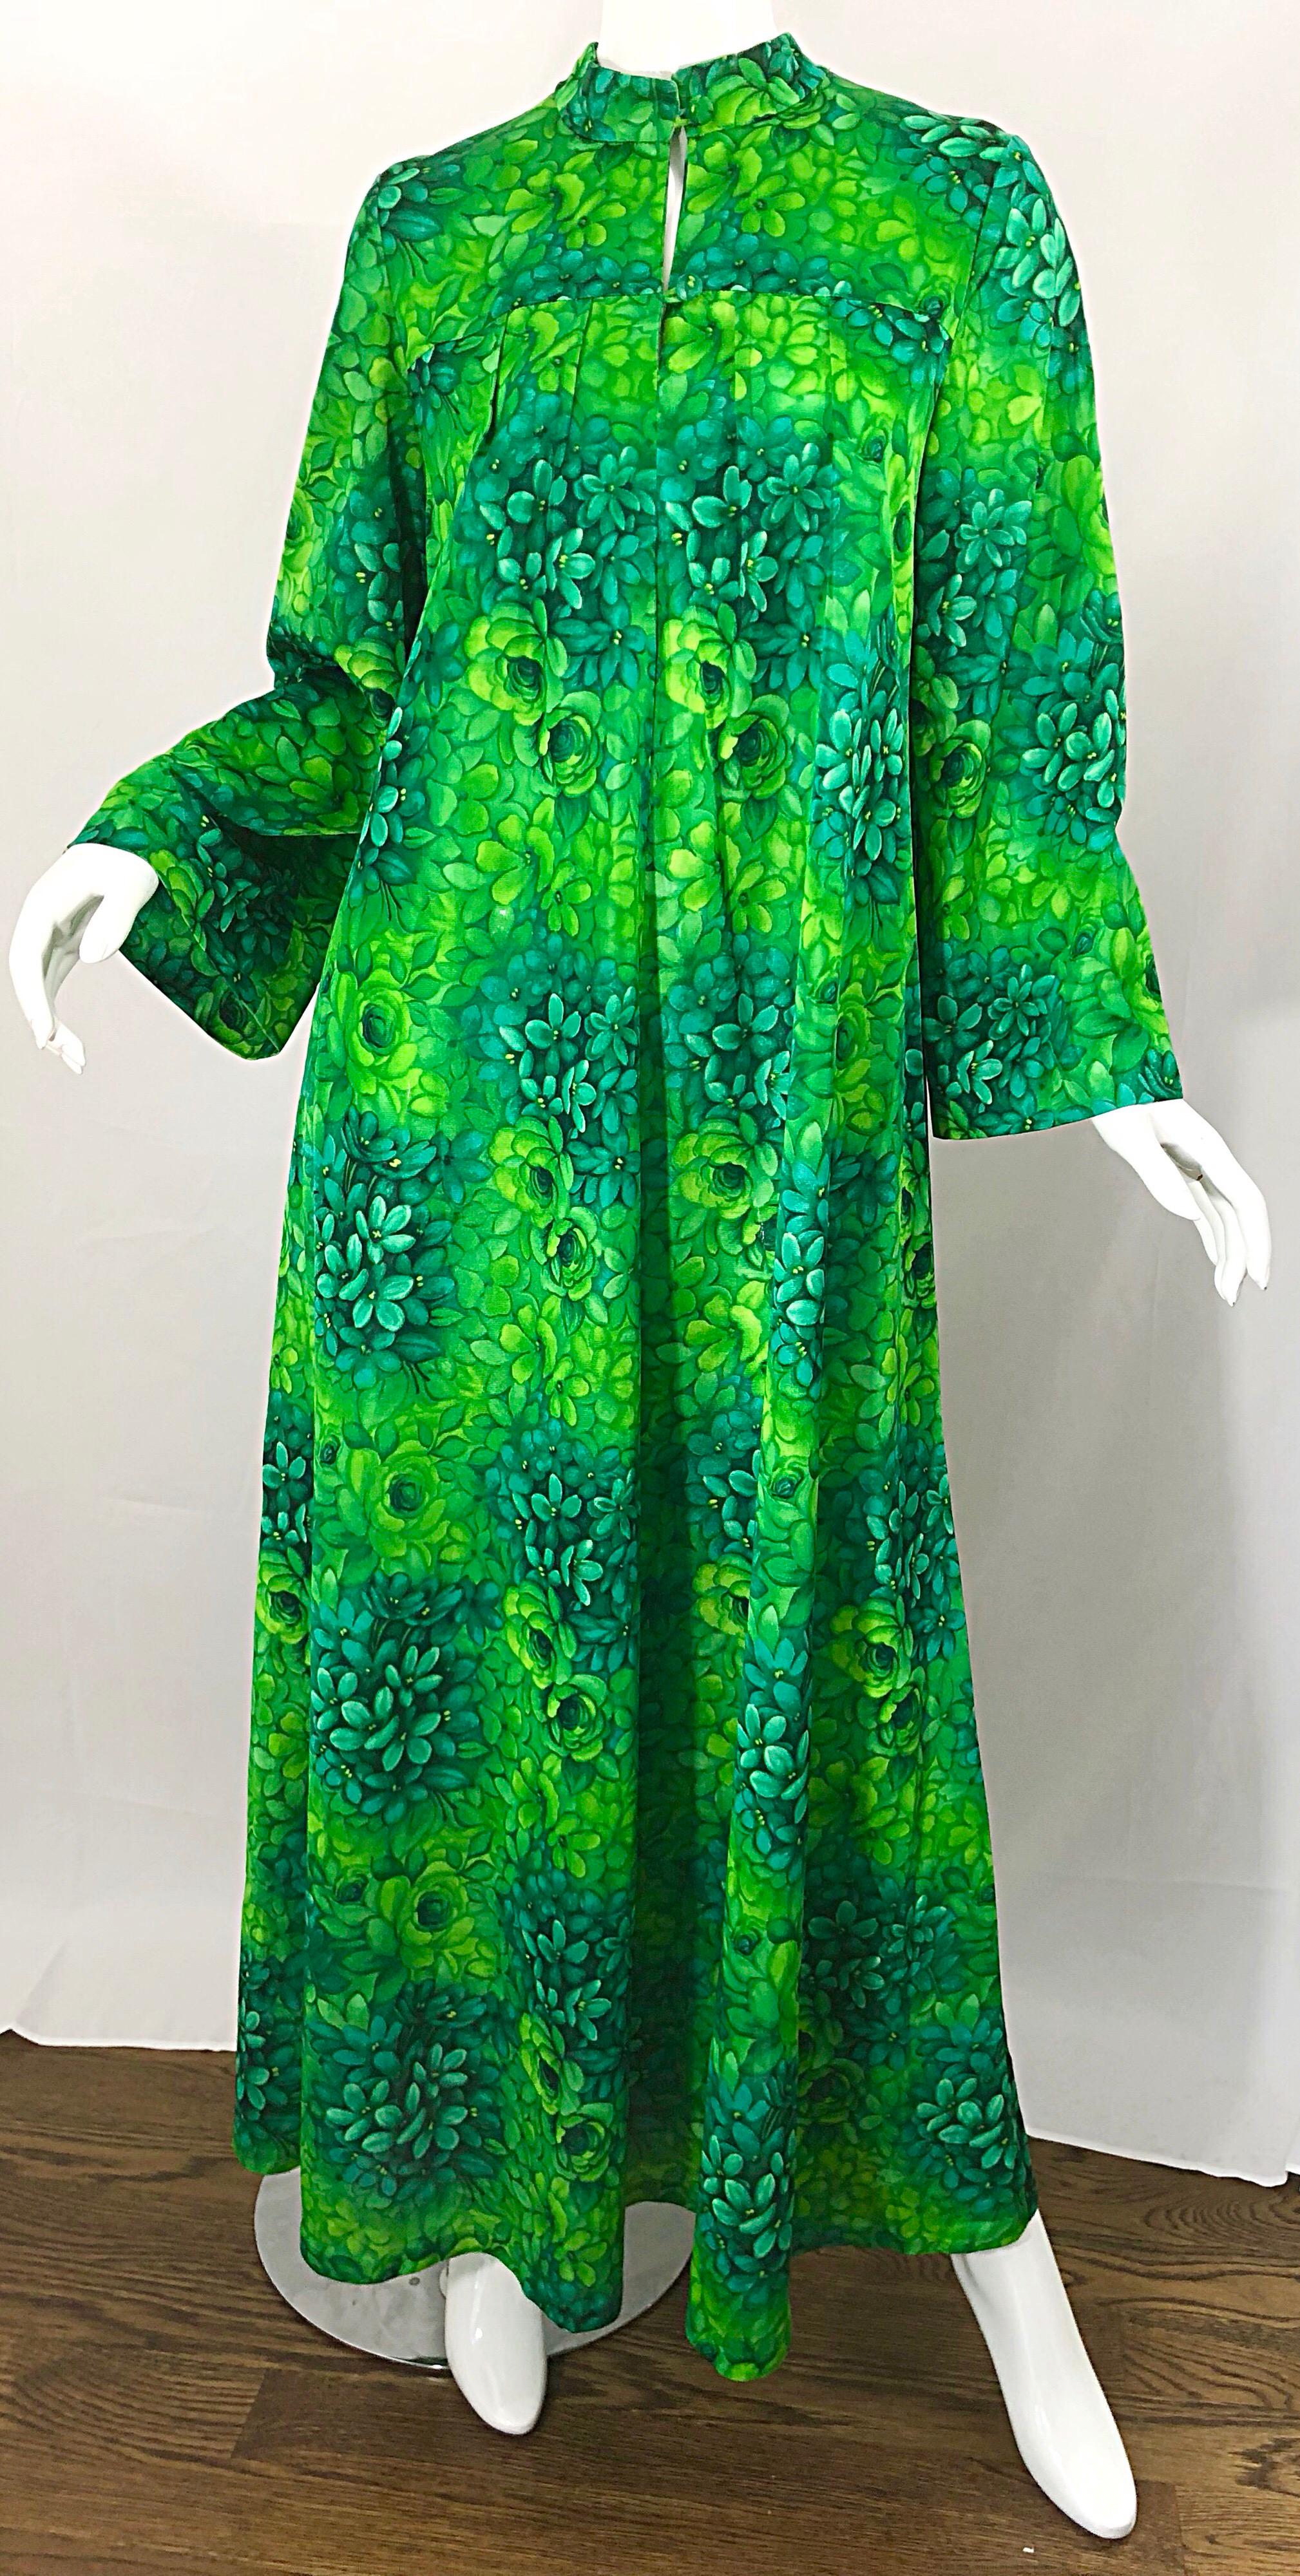 Amazing 1970s Neon + Kelly Green Abstract Flower Print 70s Vintage Caftan Dress 4